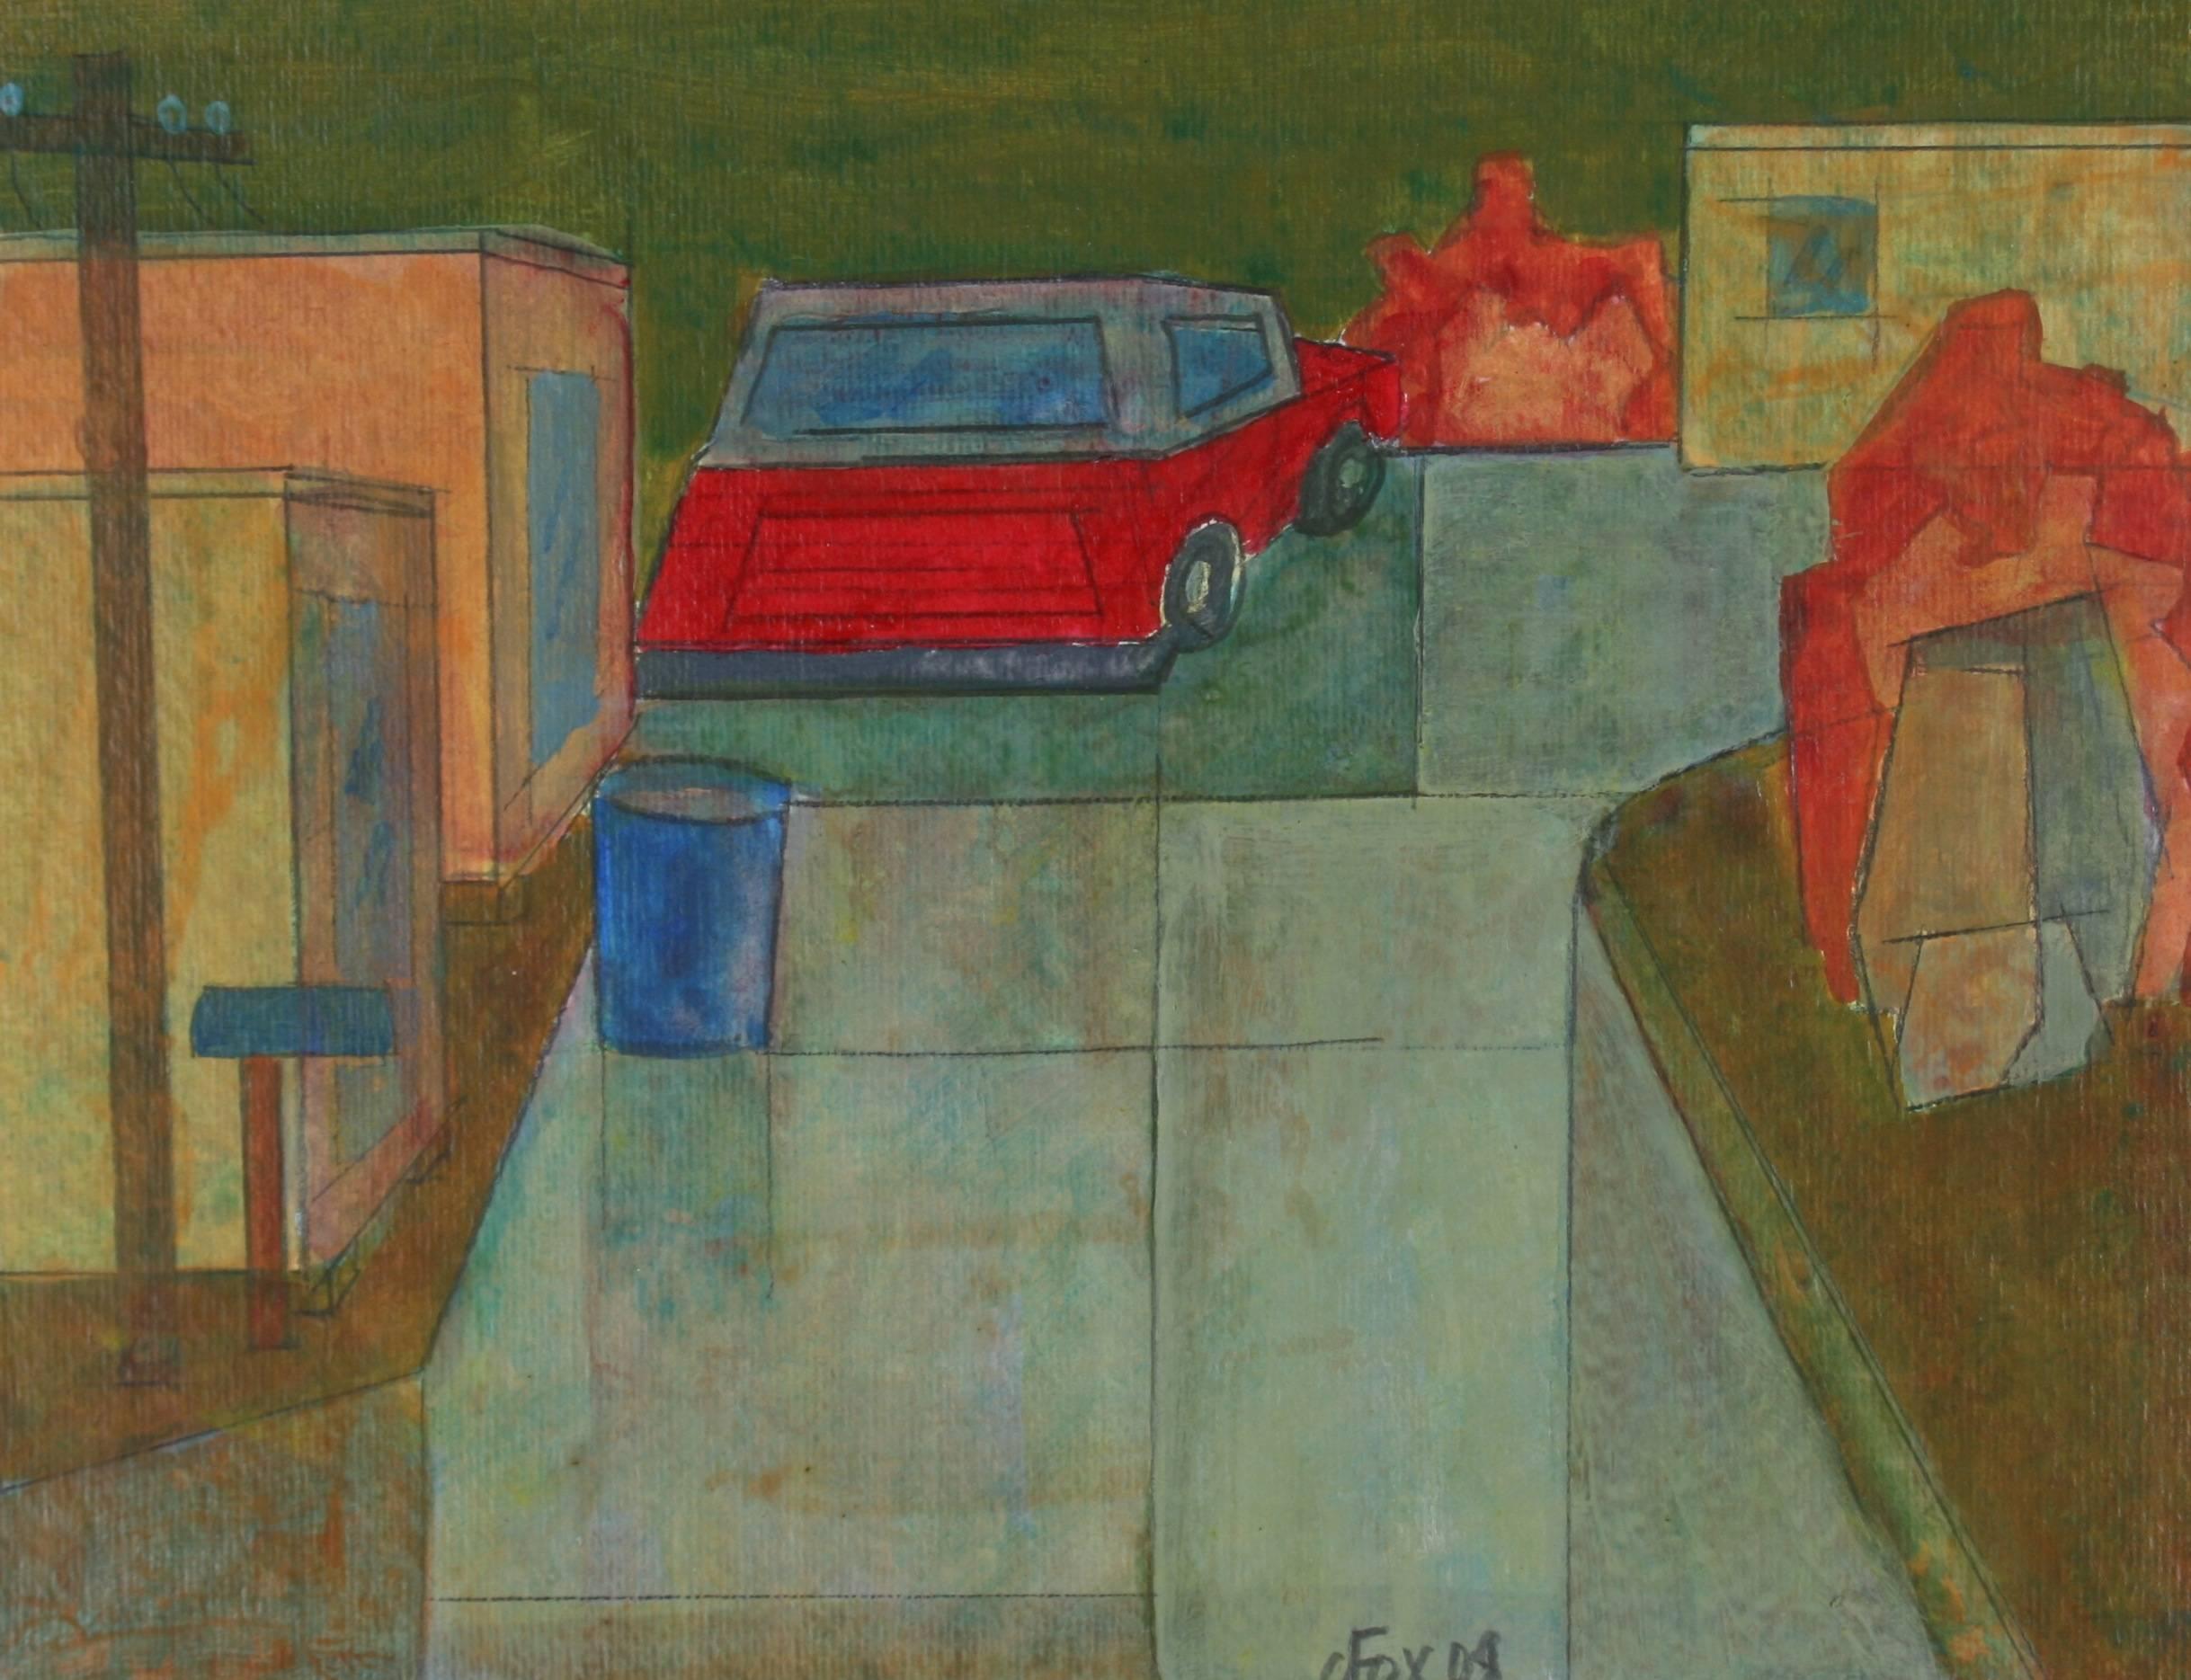 Dave Fox Abstract Painting - "Brea Canyon II" Contemporary Cubist Acrylic Painting with Red Car, 2008